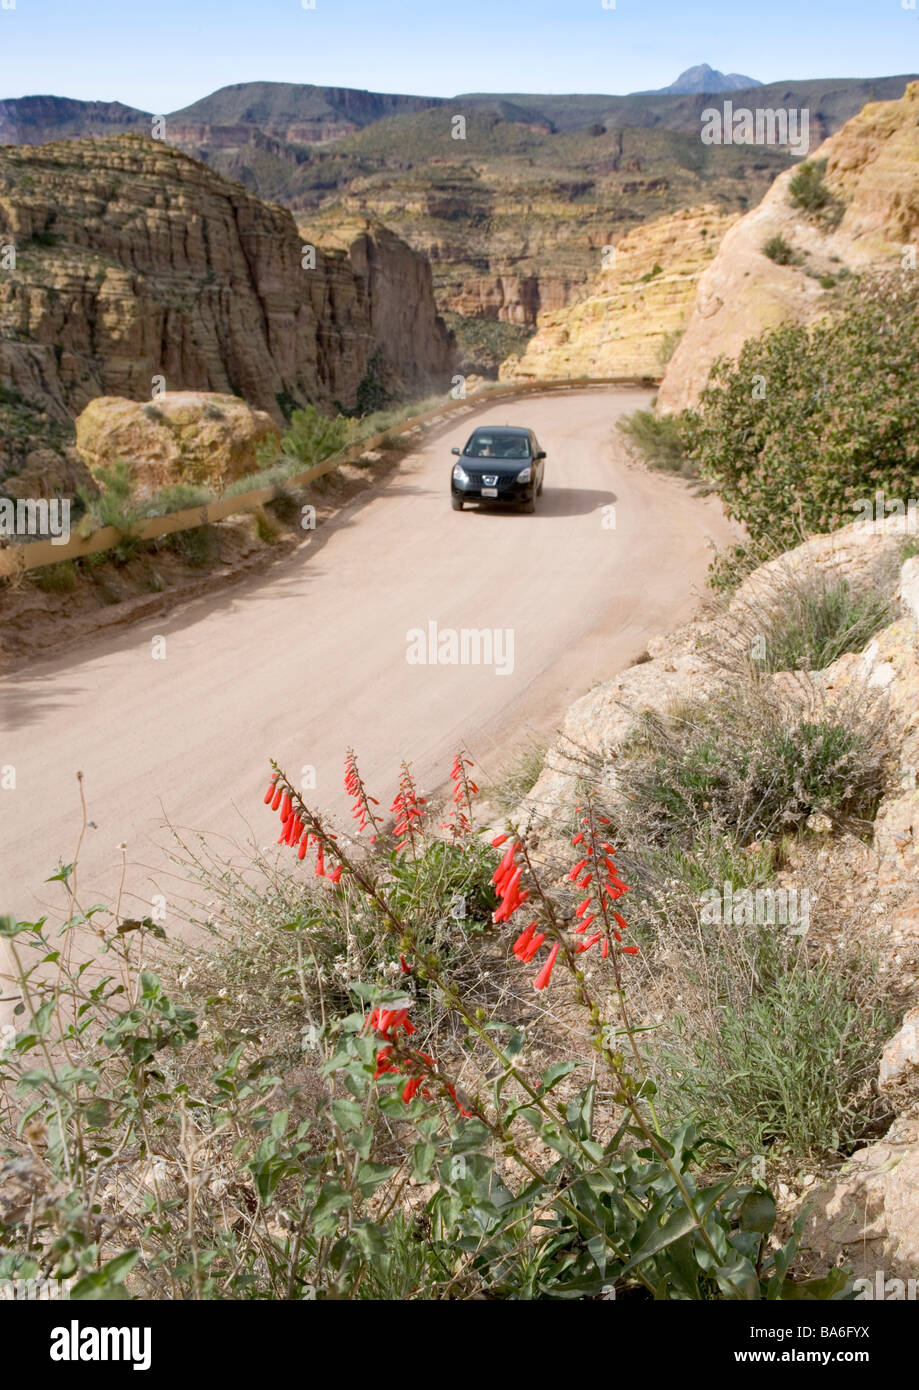 Tourists in a car negotiate the dirt road that comprises much of the Apache Trail east of Phoenix Arizona Stock Photo